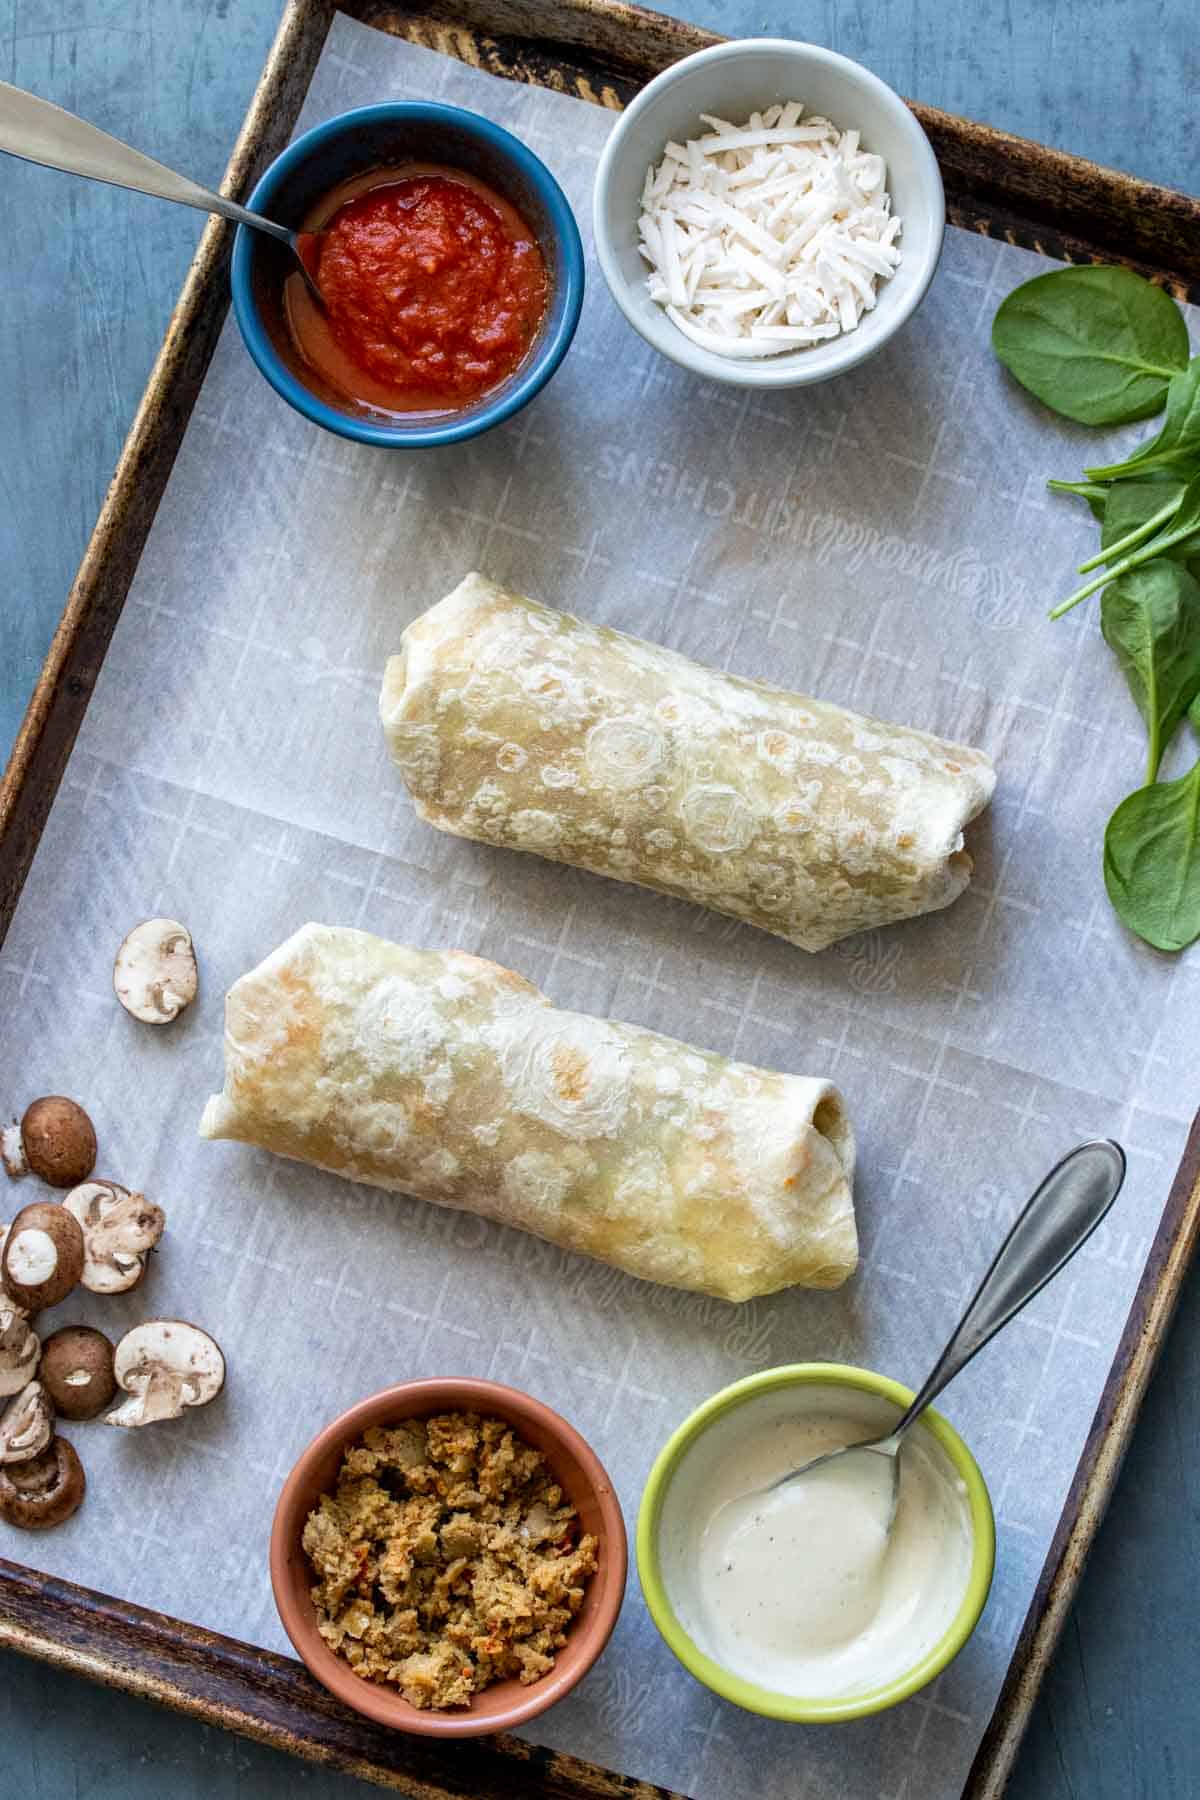 Two burritos on a parchment lined baking sheet with pizza ingredients around it